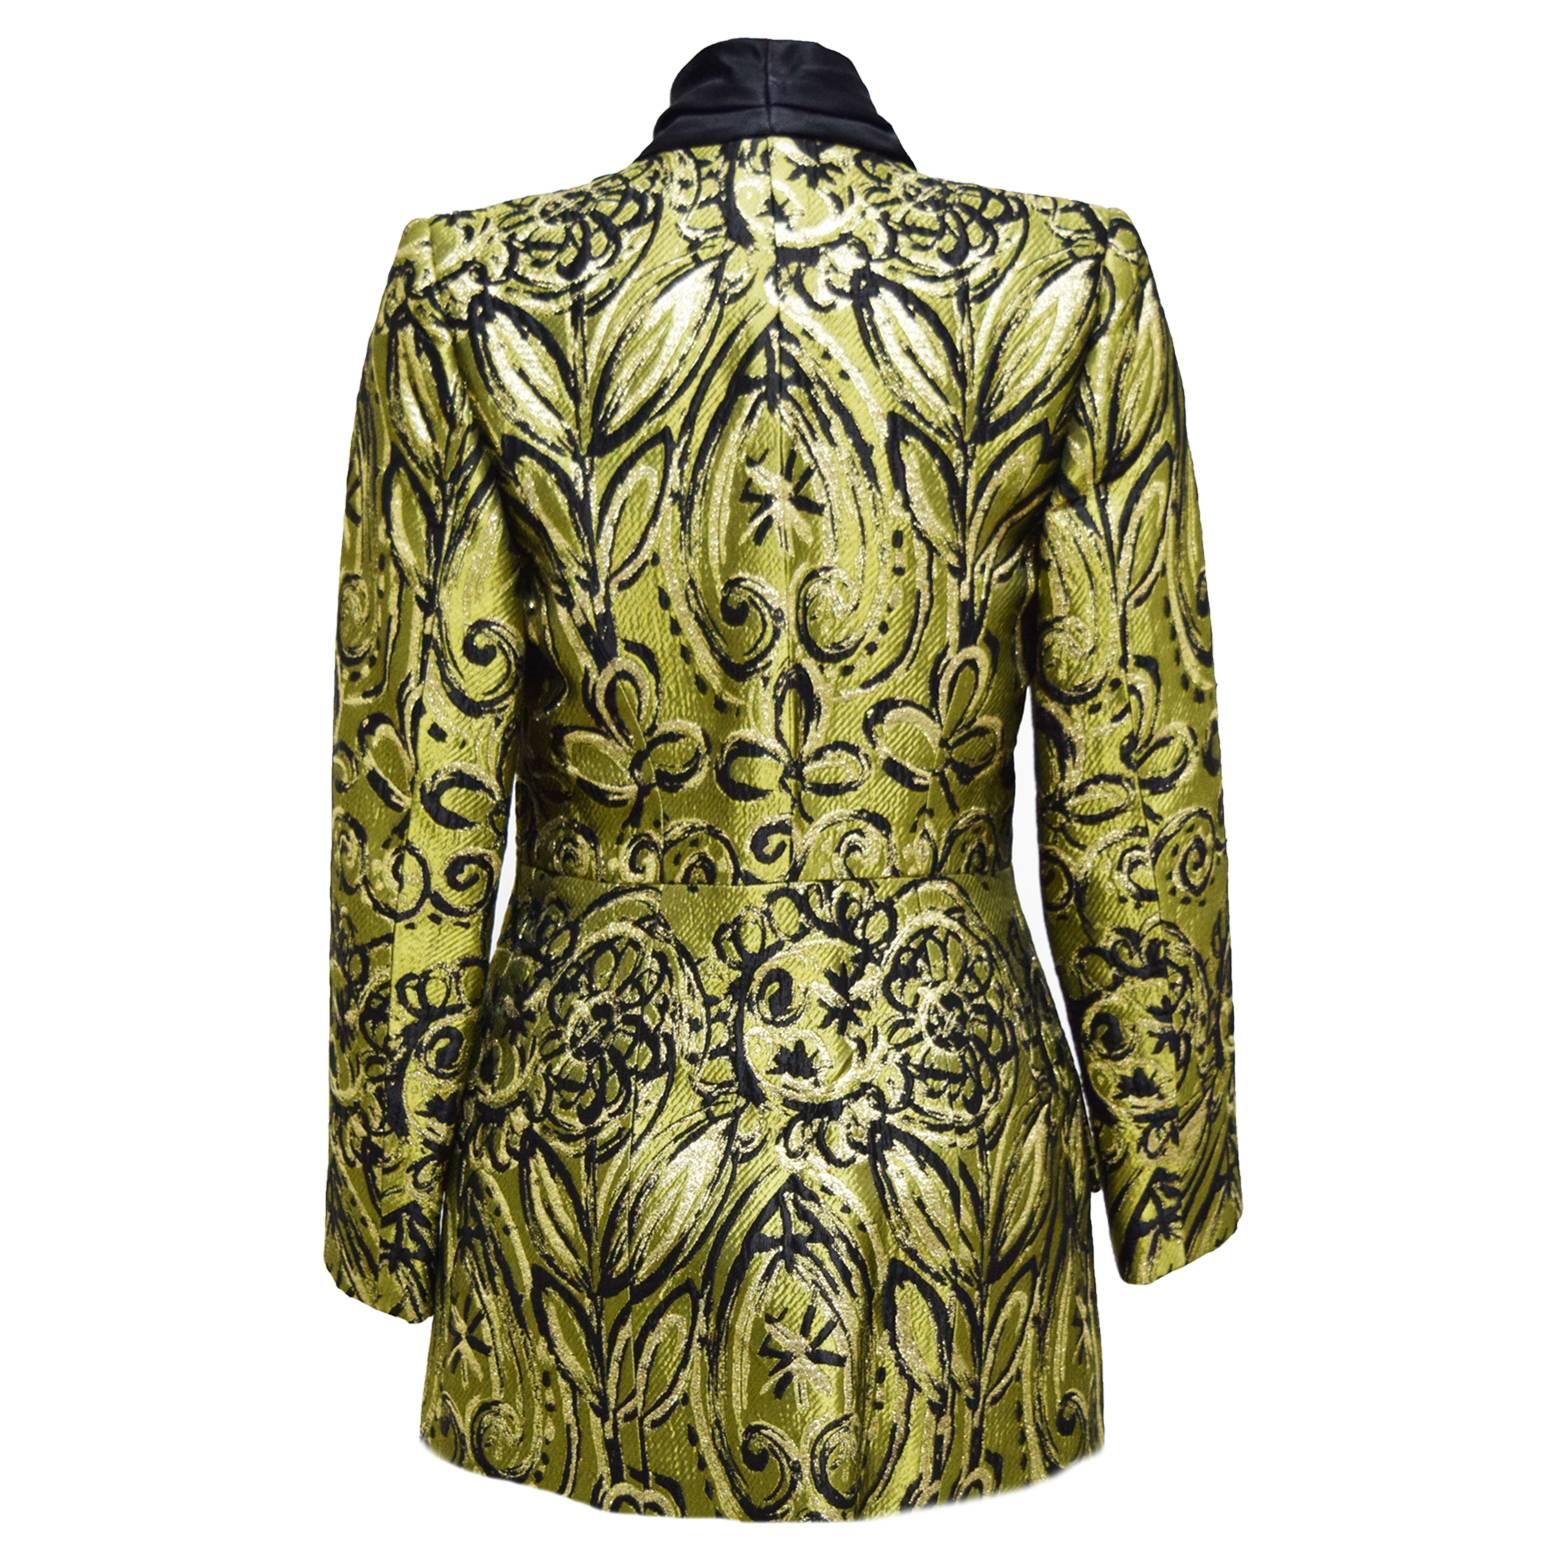 This fabulous Christian La croix two piece is mixed with olive green, metallic gold, black, and grey abstract floral print. The neck is covered in rich black satin for a amazing contrast. The Jacket part of the suit has two snap closures and a main